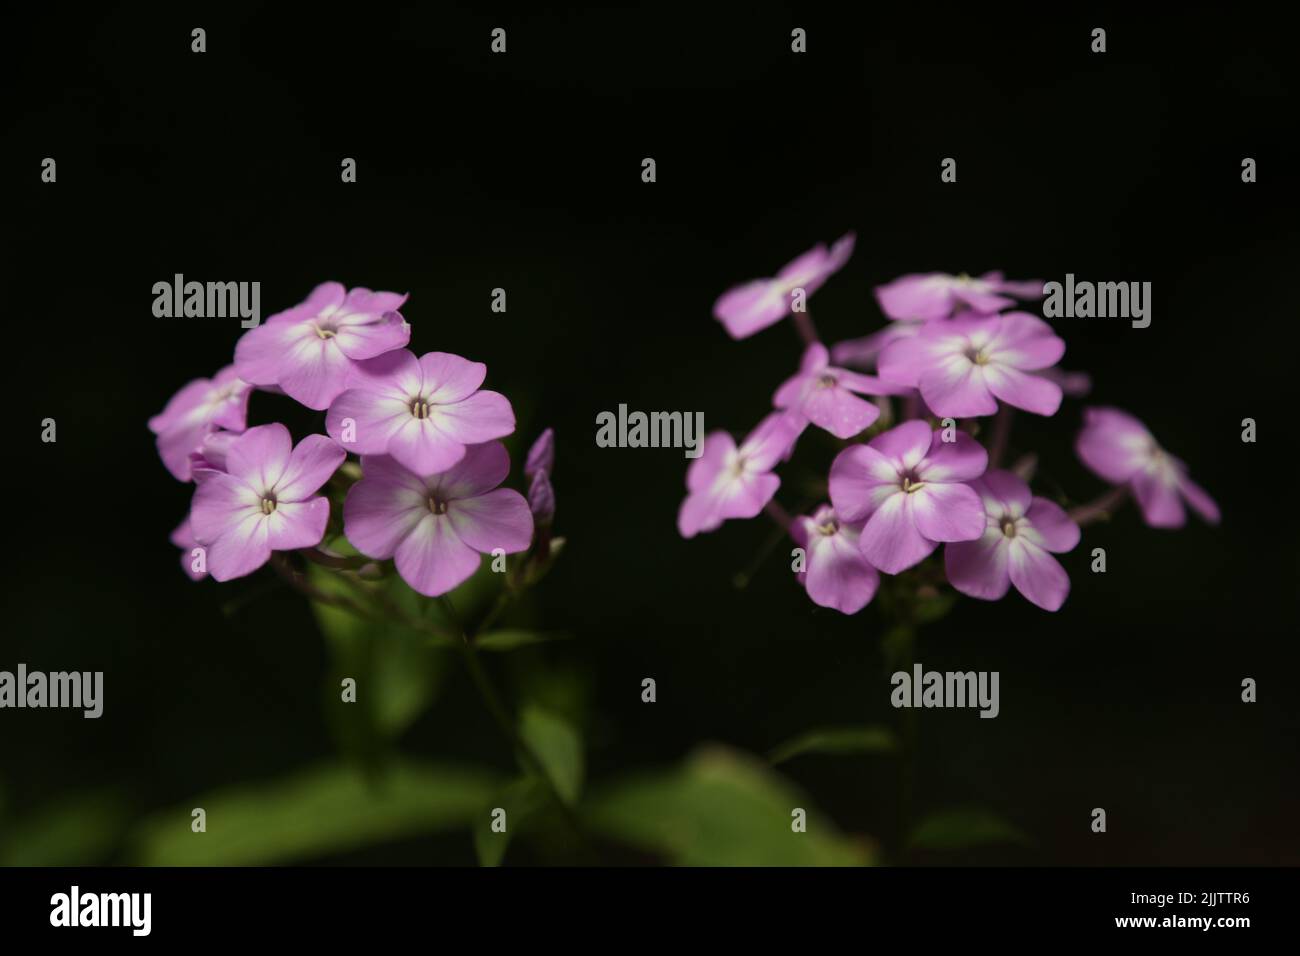 A closeup shot of blooming purple Phlox flowers isolated in black background Stock Photo